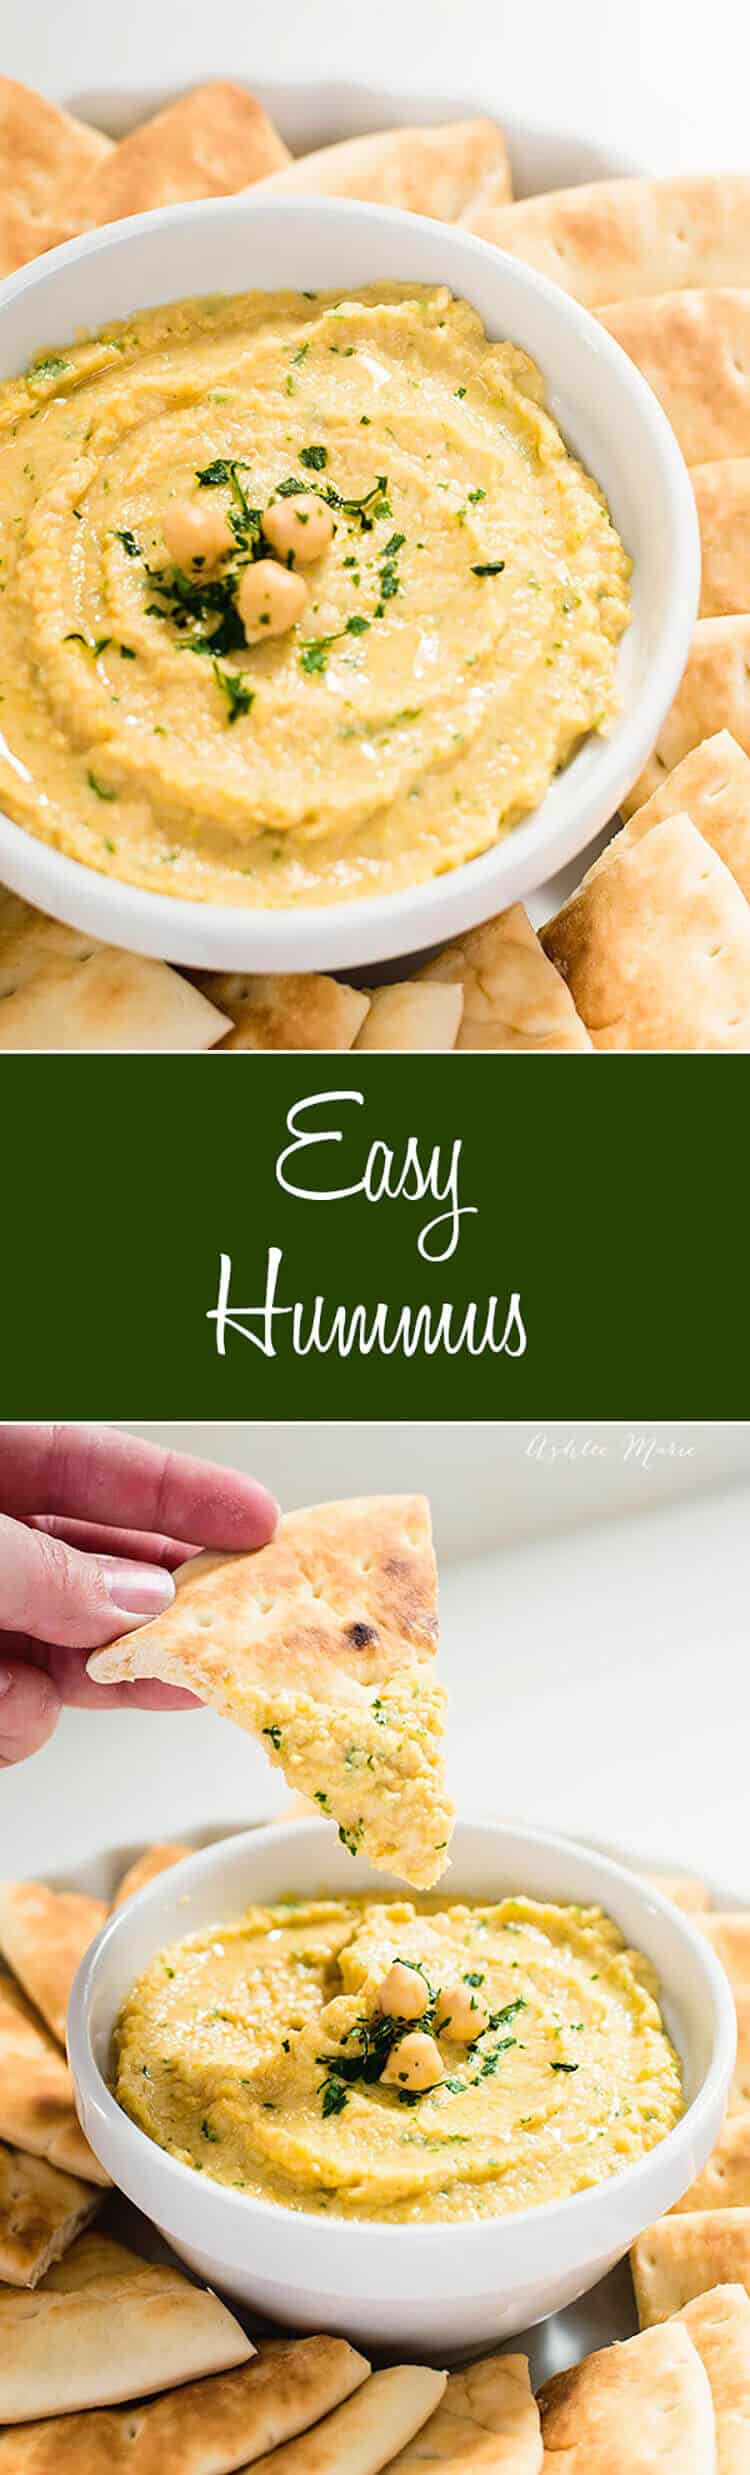 hummus is easy to make and tastes great!